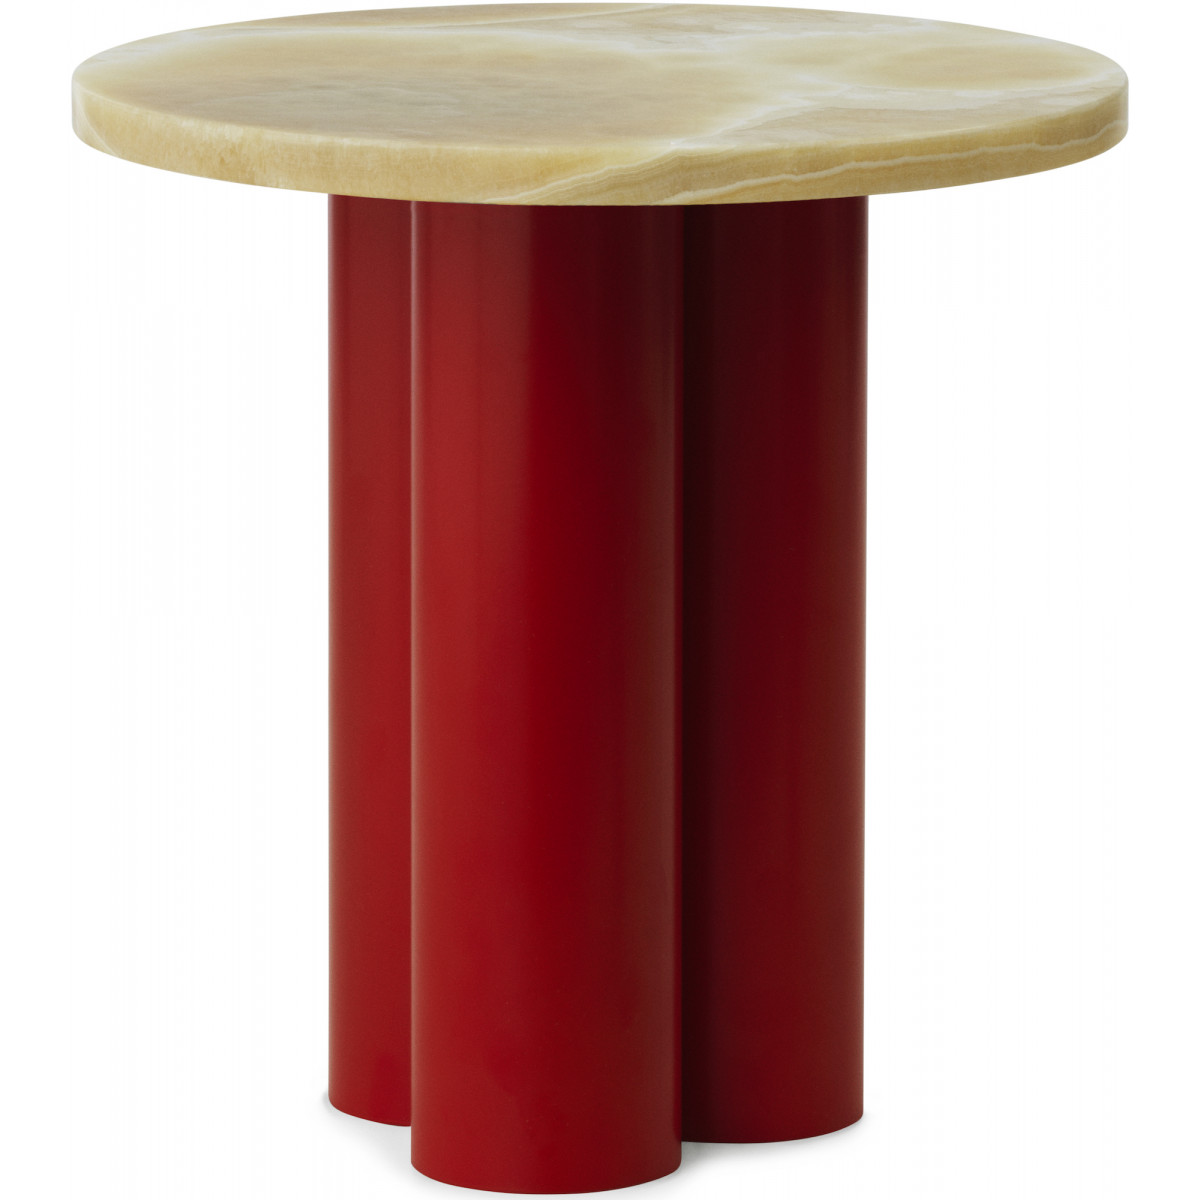 Dit Table – Bright Red Frame + Honey Onyx Tabletop